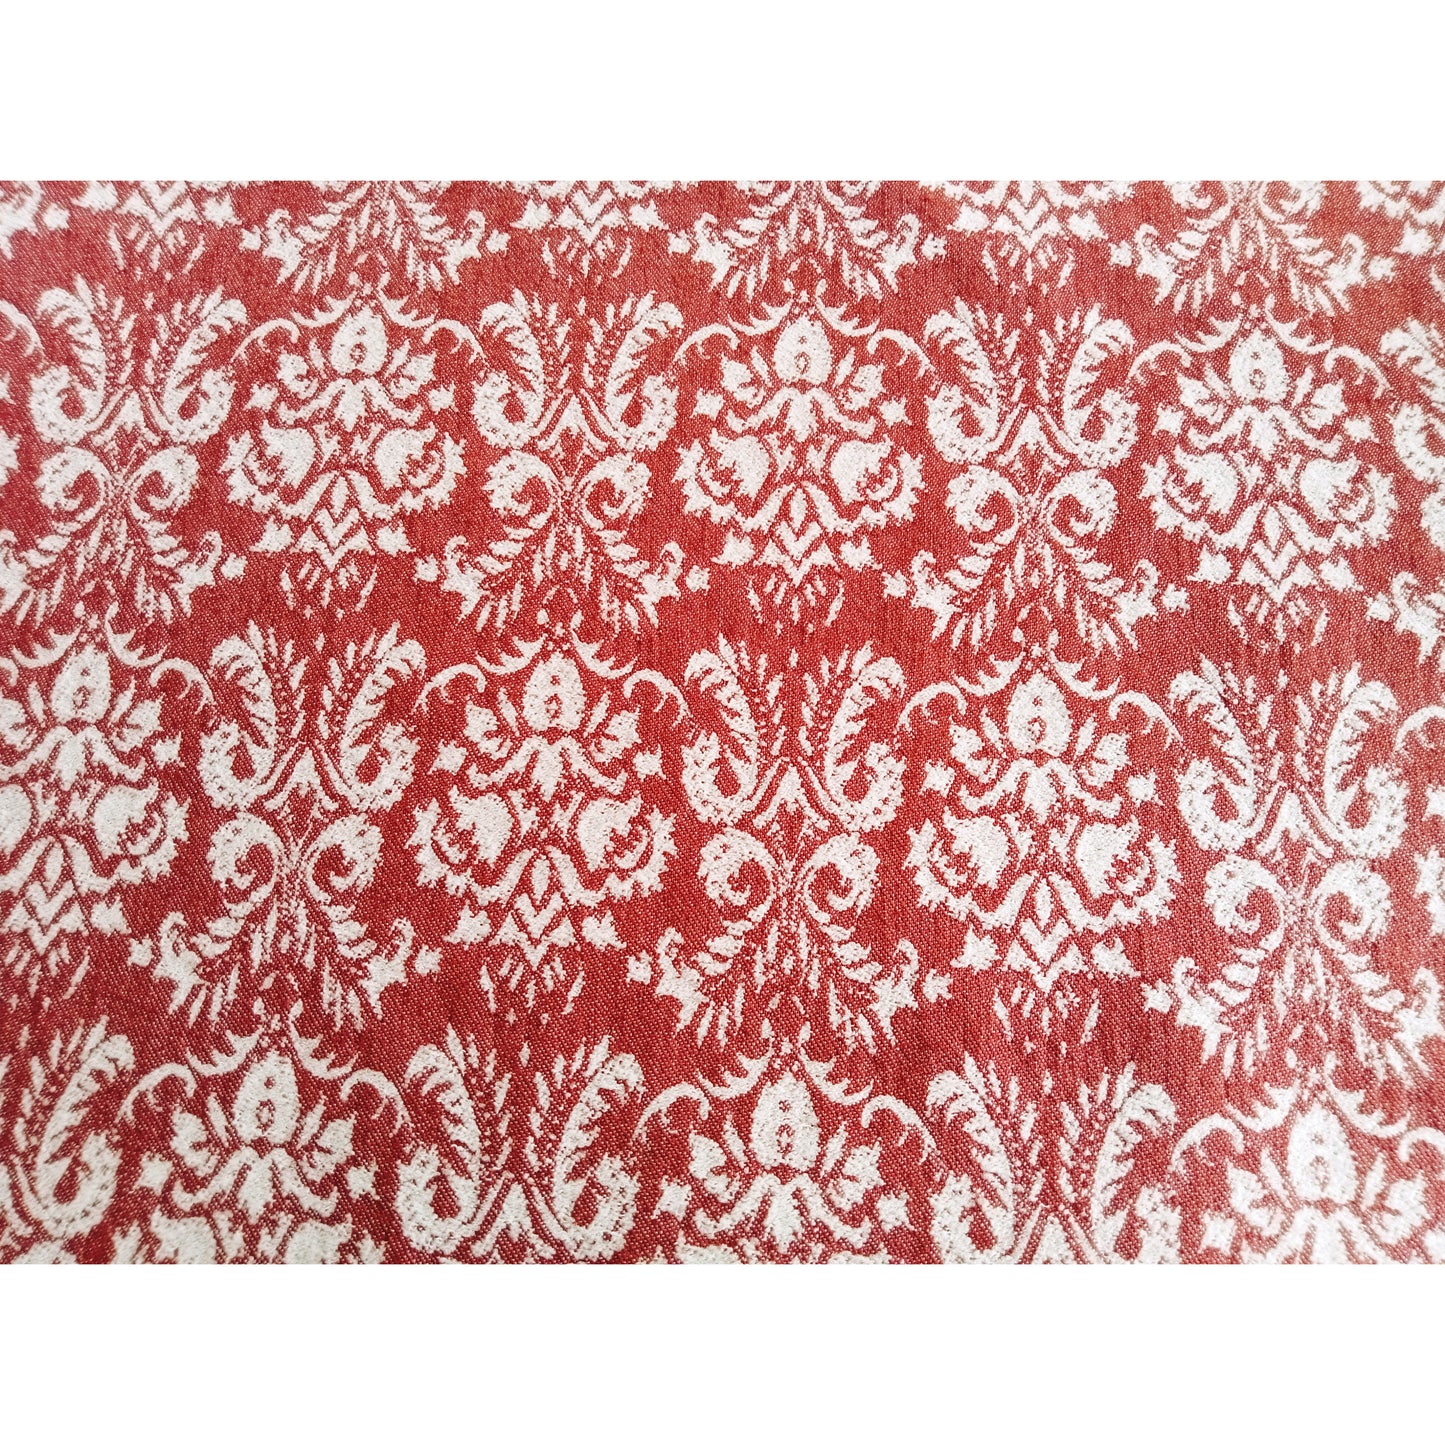 Jacqueline - Jacquard bengaline fabric -sold by 1/2mtrs